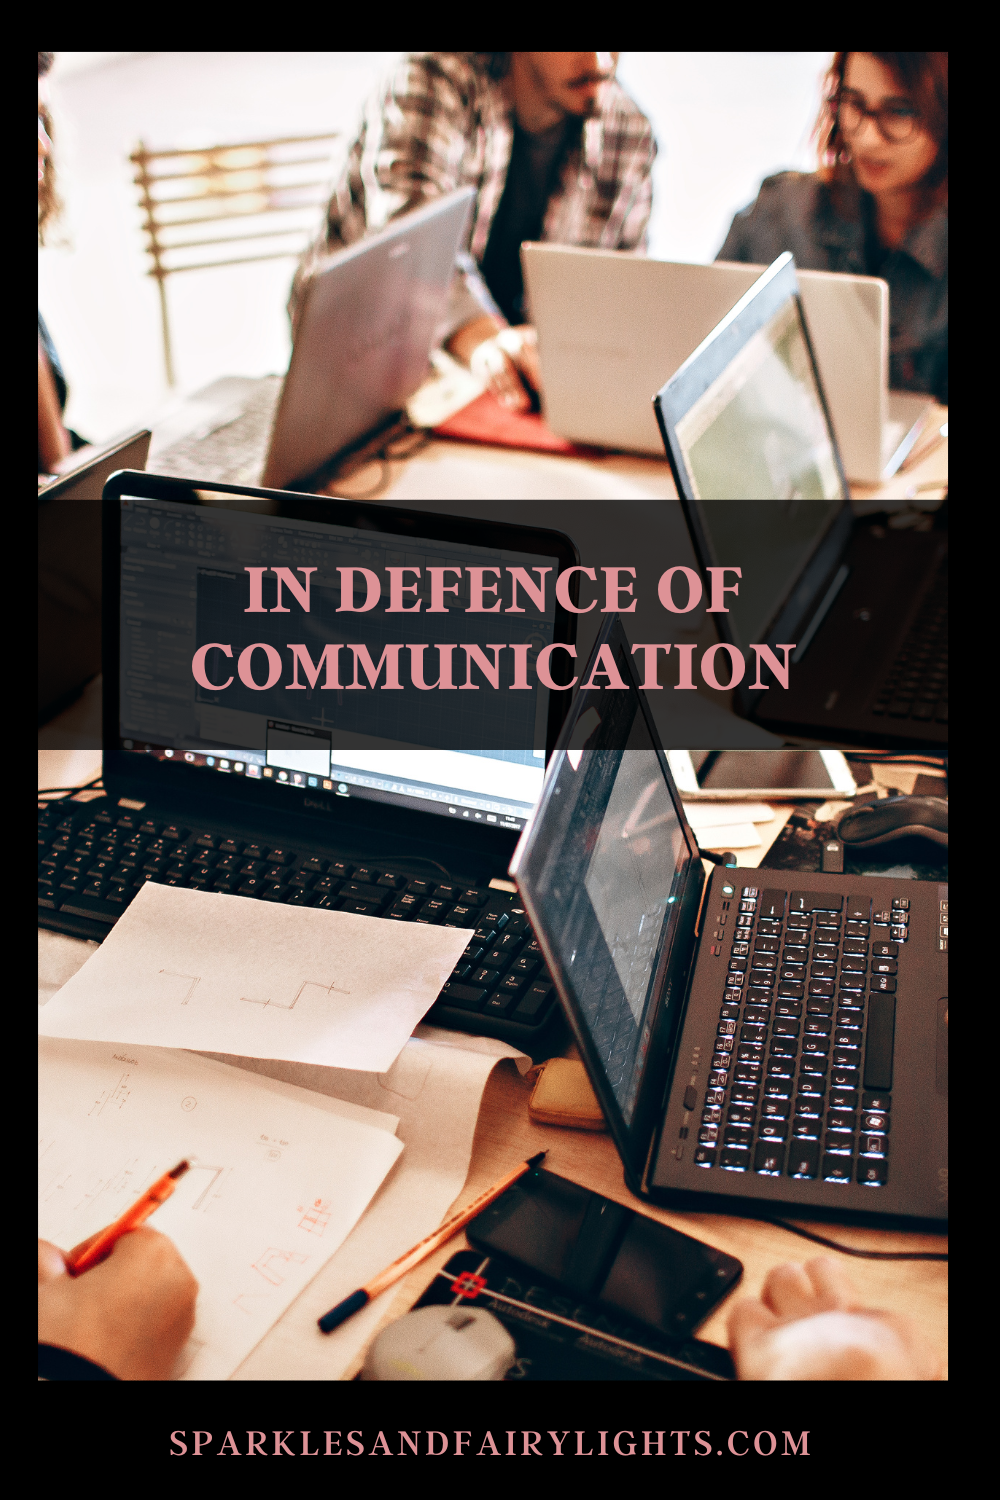 In defence of communication